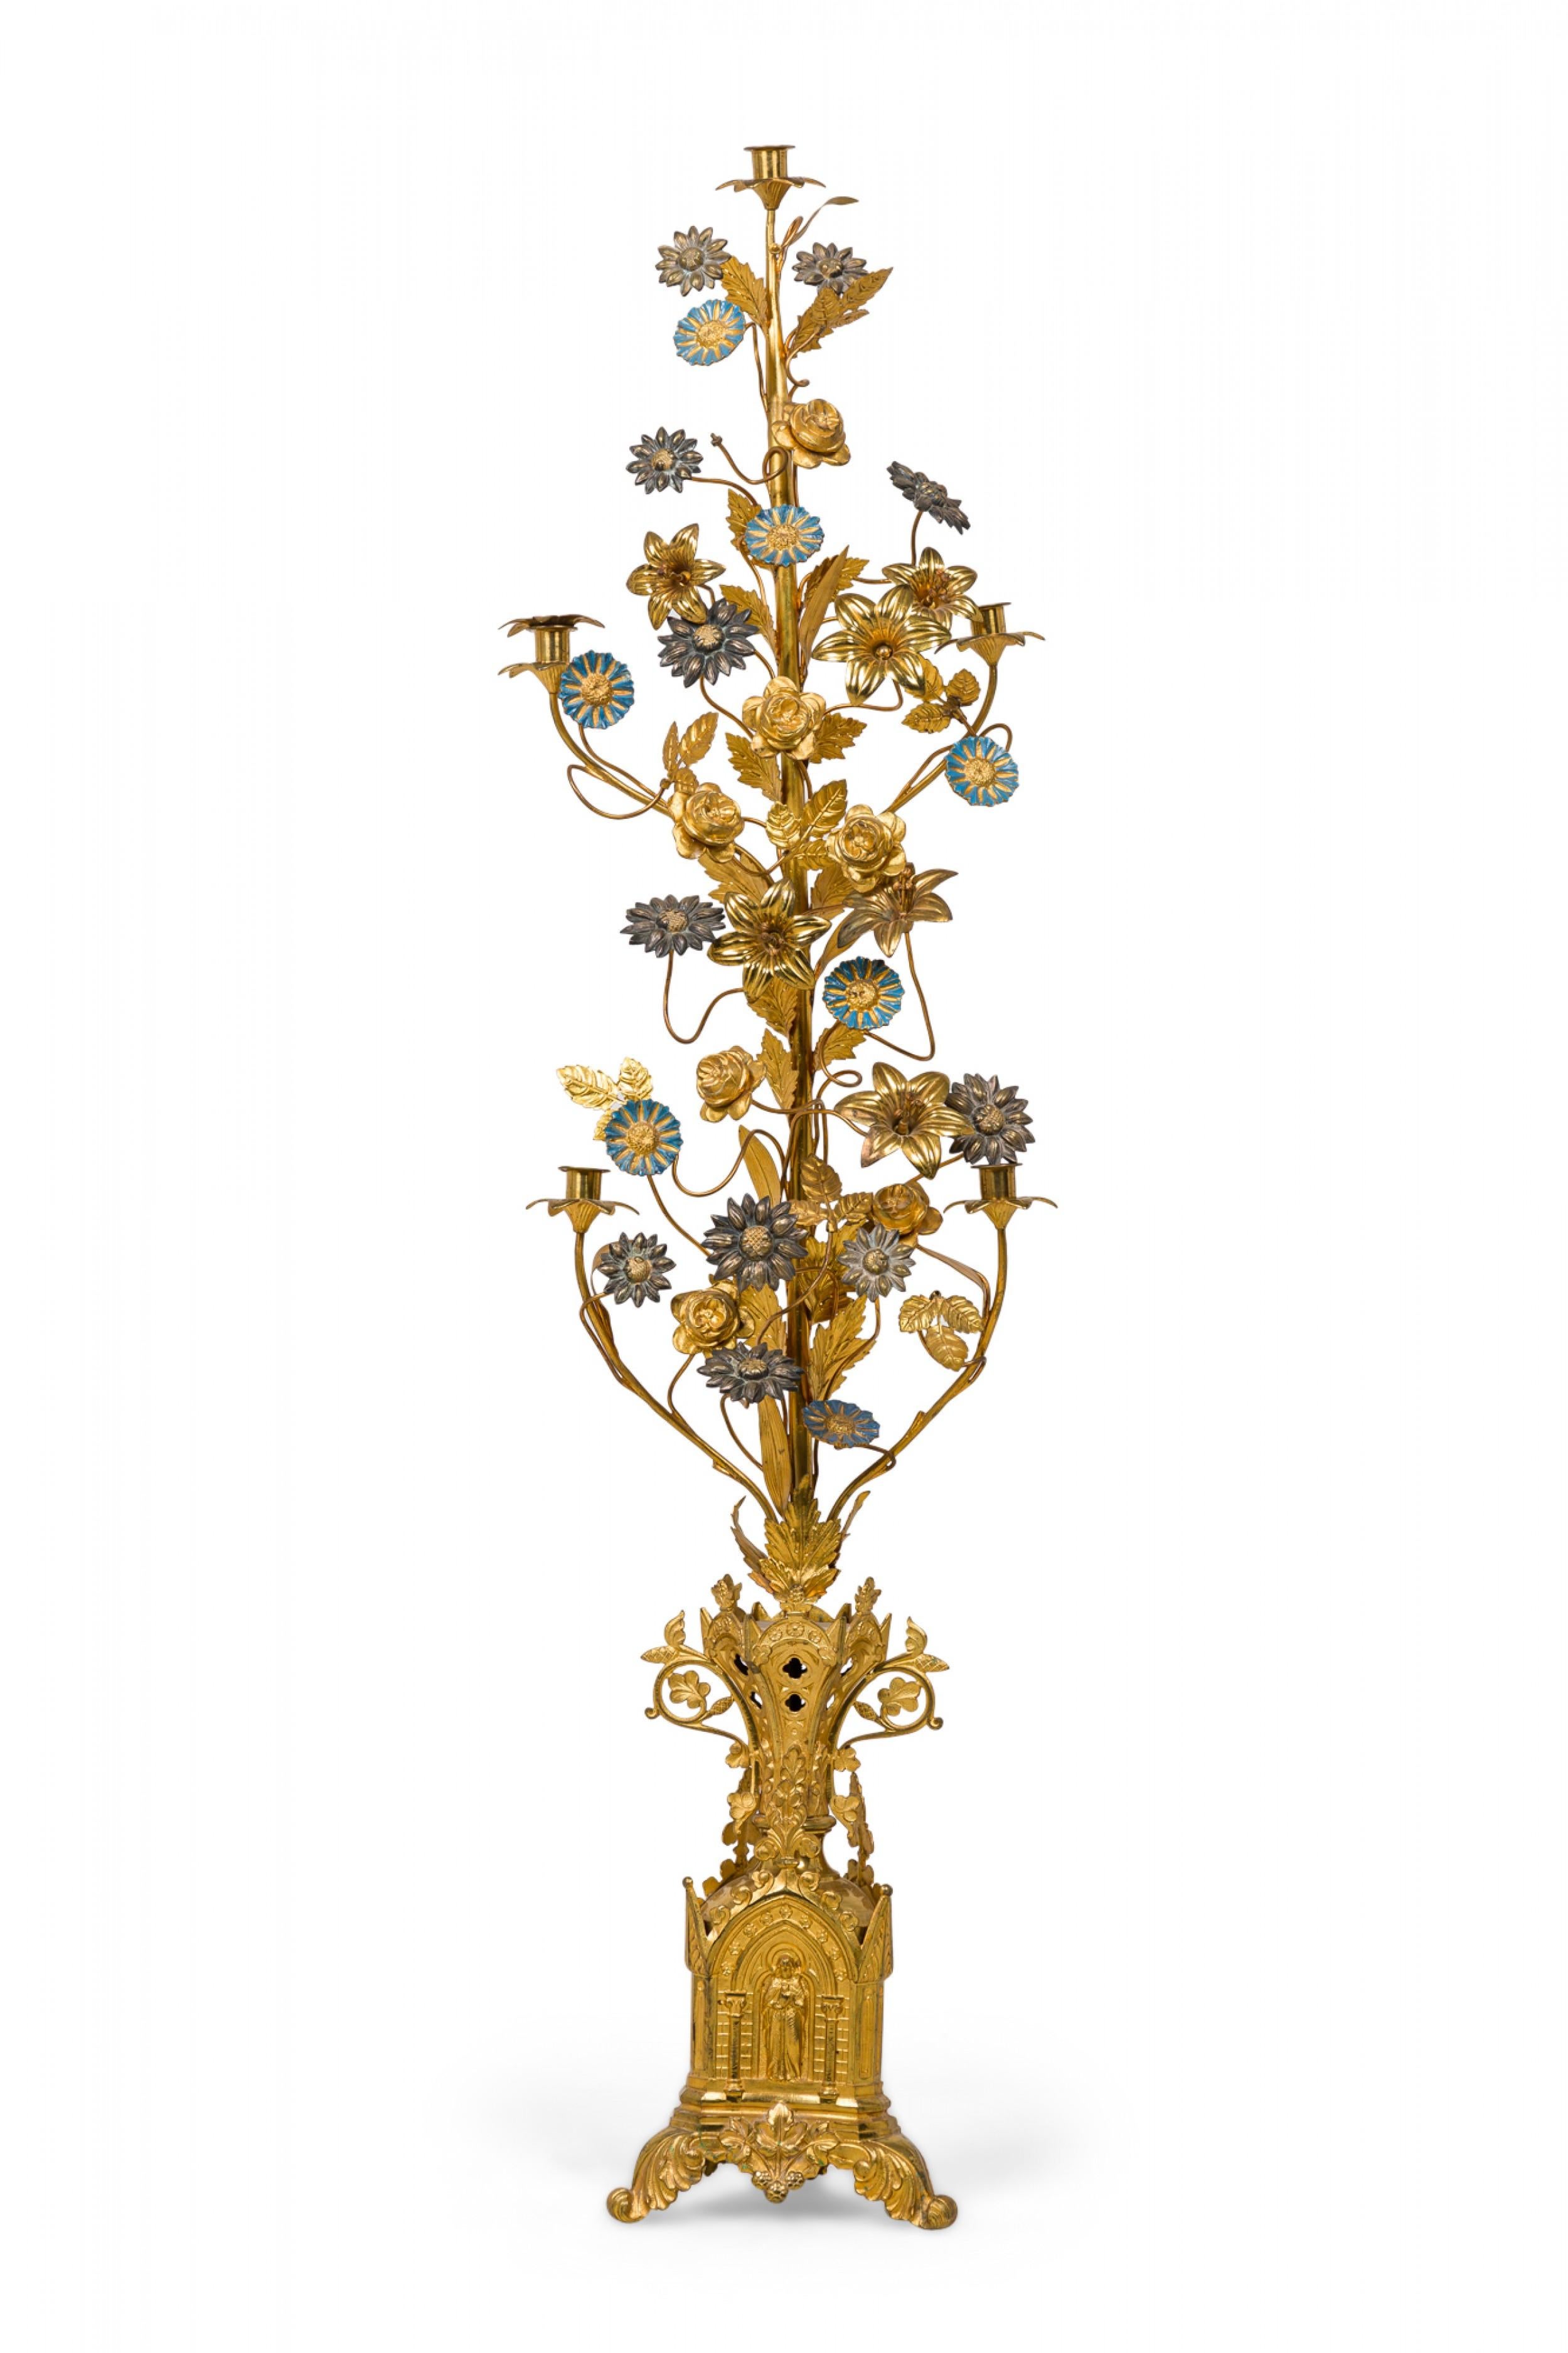 Pair of Continental (19/20th century) brass candelabras with central posts supporting a vine-like exterior embellishment structure with candle holders interspersed among blue enameled and antiqued brass flowers and leaves. The bases are three-sided